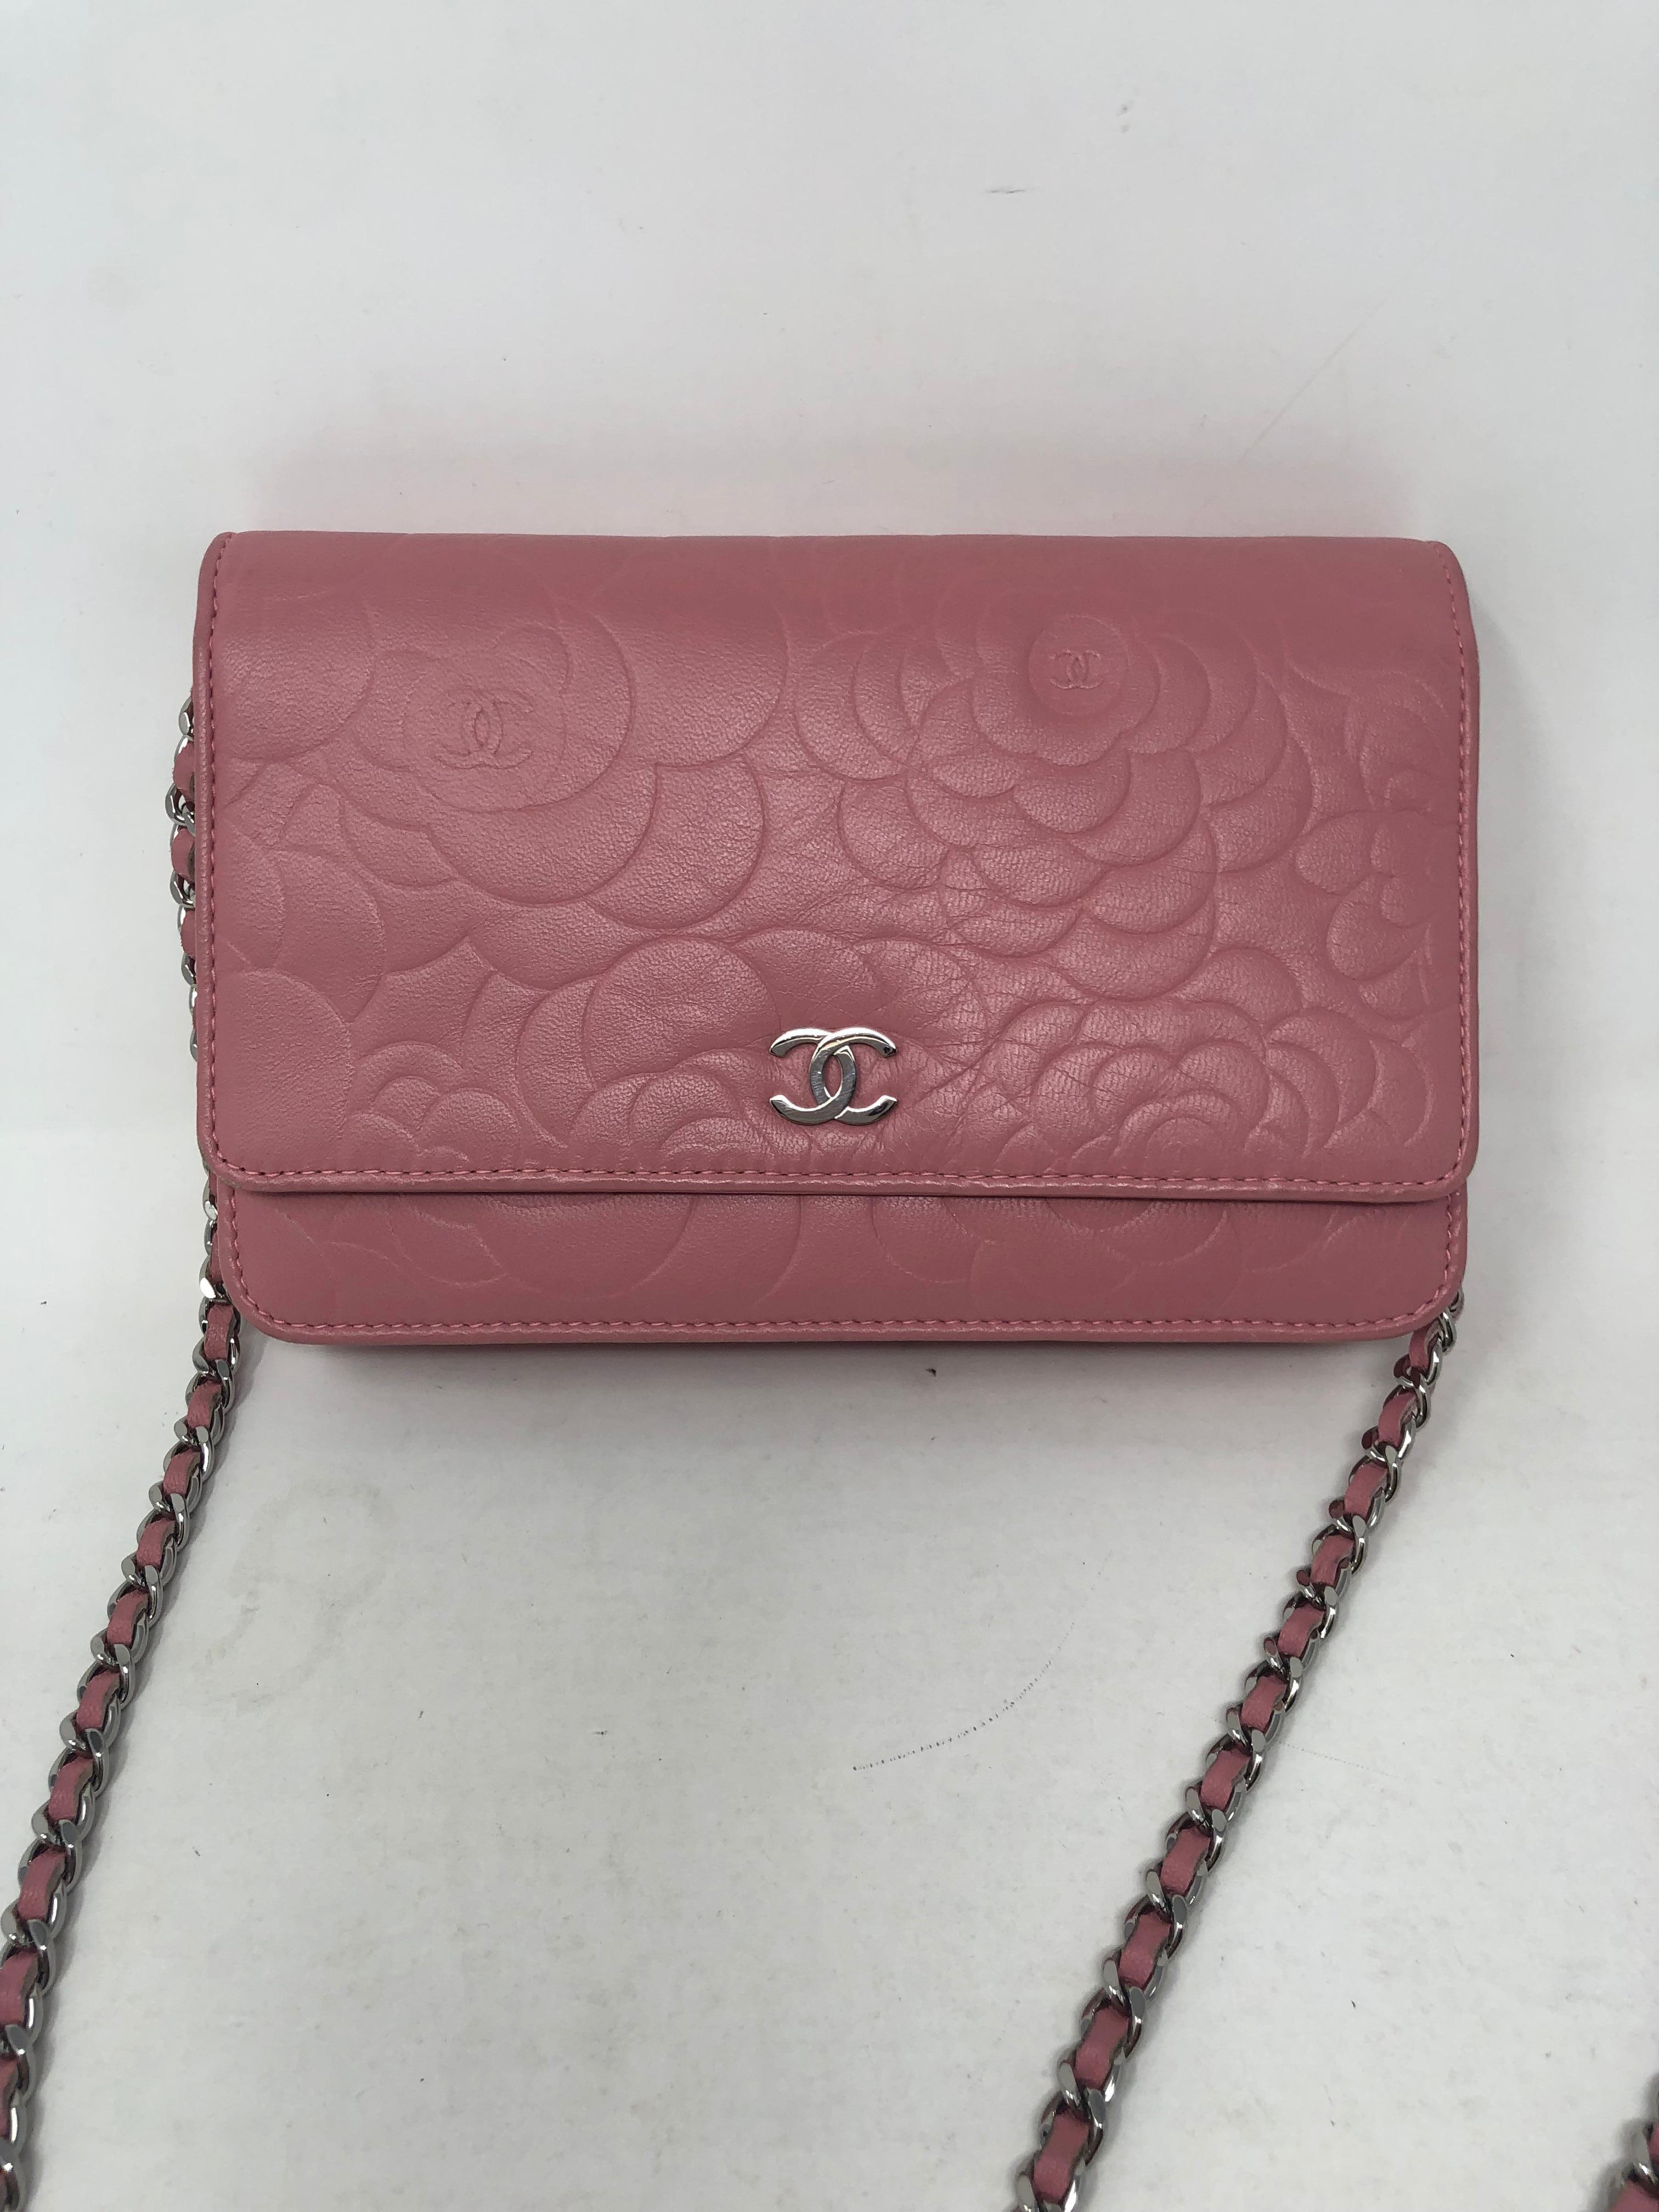 Chanel Pink Wallet On A Chain Crossbody Bag. Camelia leather embossed with silver hardware. Good condition. Can be worn as a clutch or a crossbody. Serial number inside bag. Guaranteed authentic. 